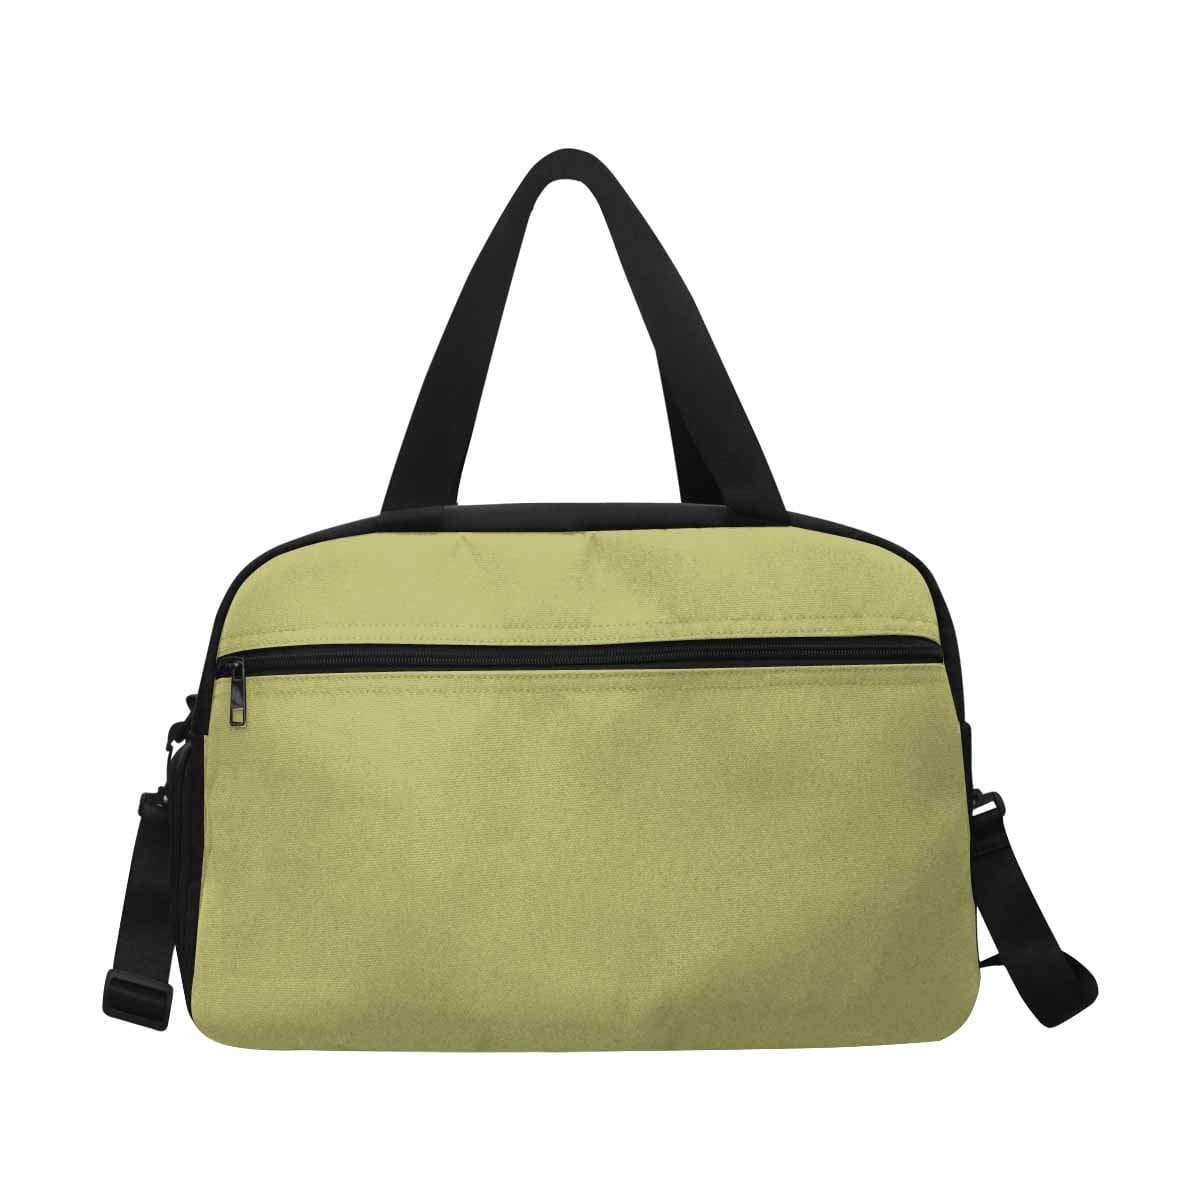 Olive Green Tote And Crossbody Travel Bag - Bags | Travel Bags | Crossbody